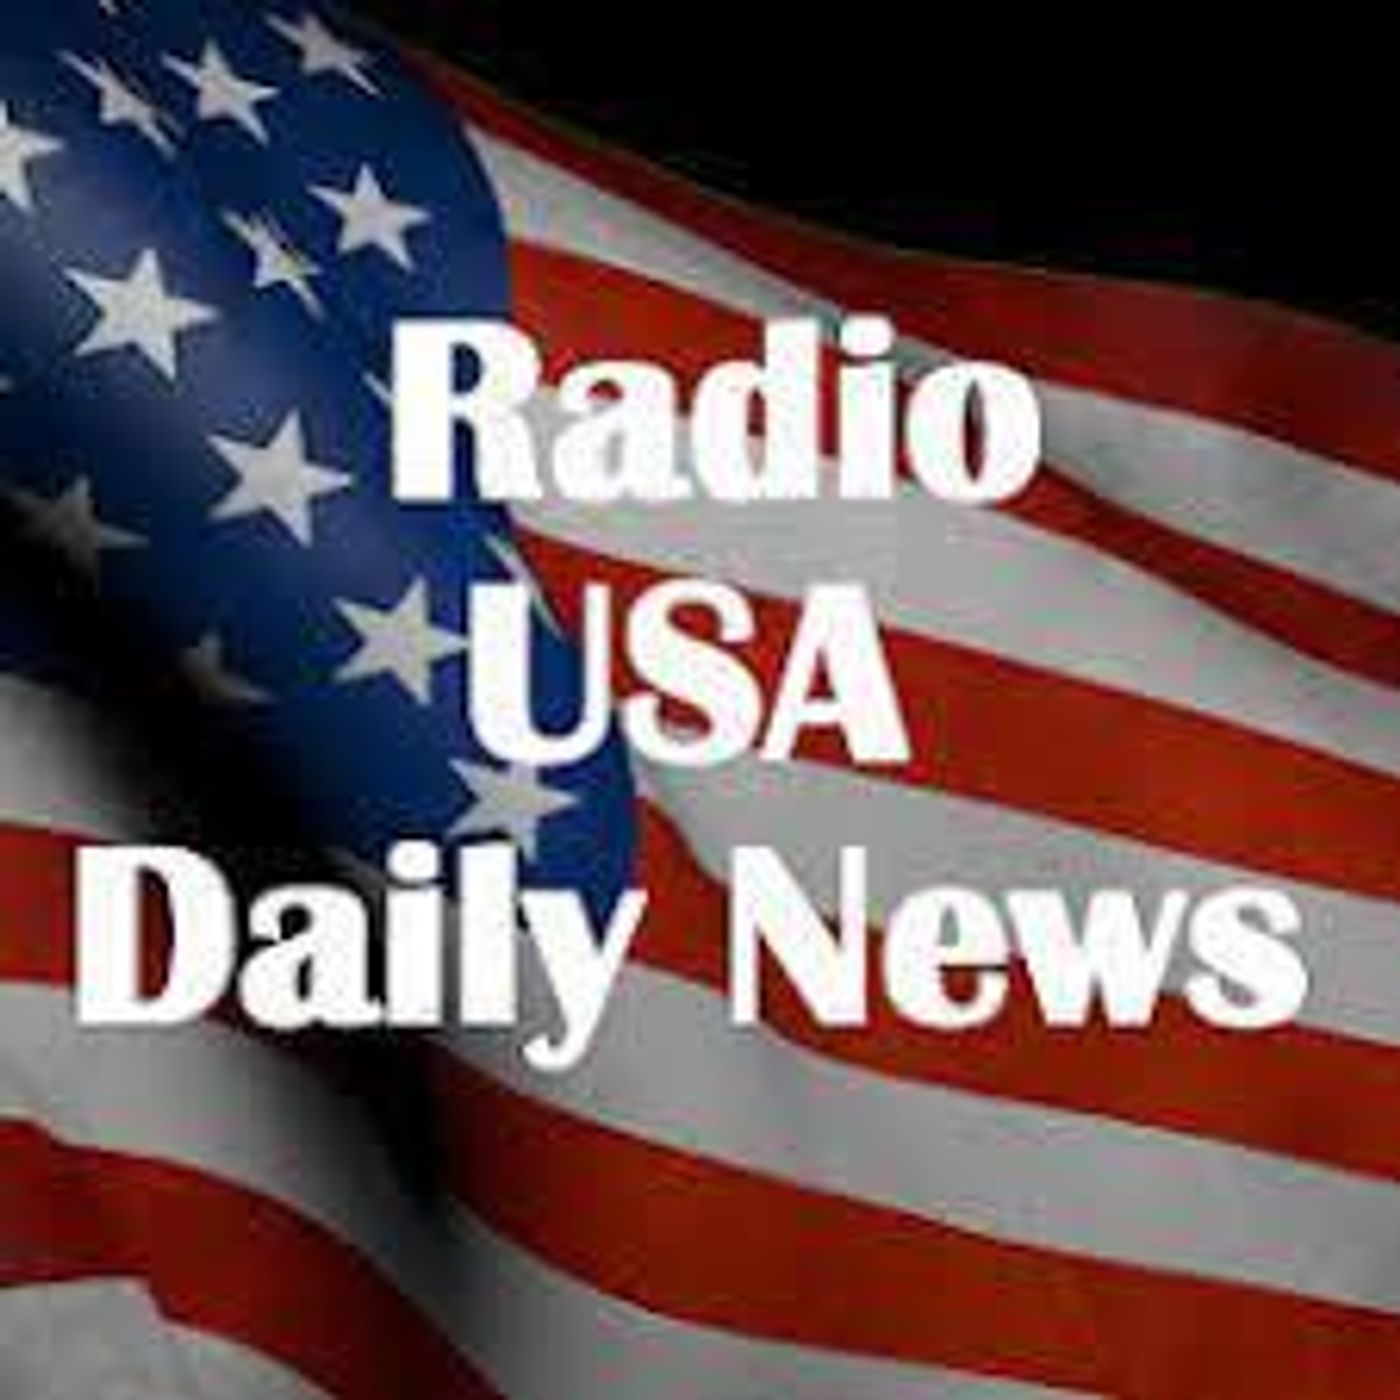 48: Steve Snyder is interviewed on USA Radio Daily